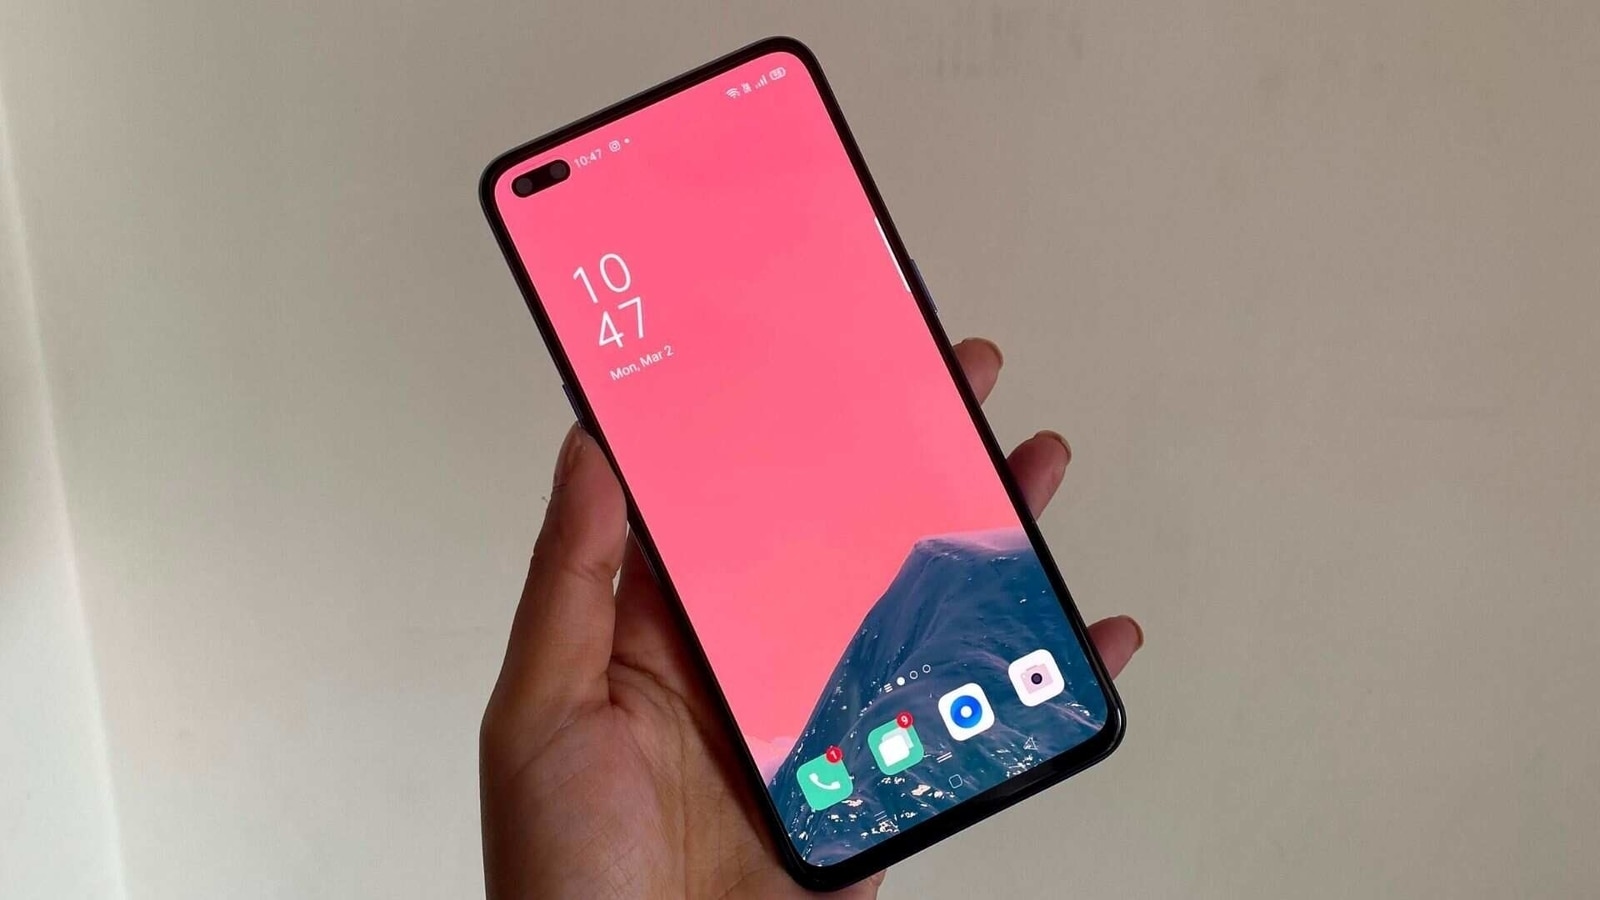 Oppo Reno3 Pro launches with dual 44-megapixel selfie camera